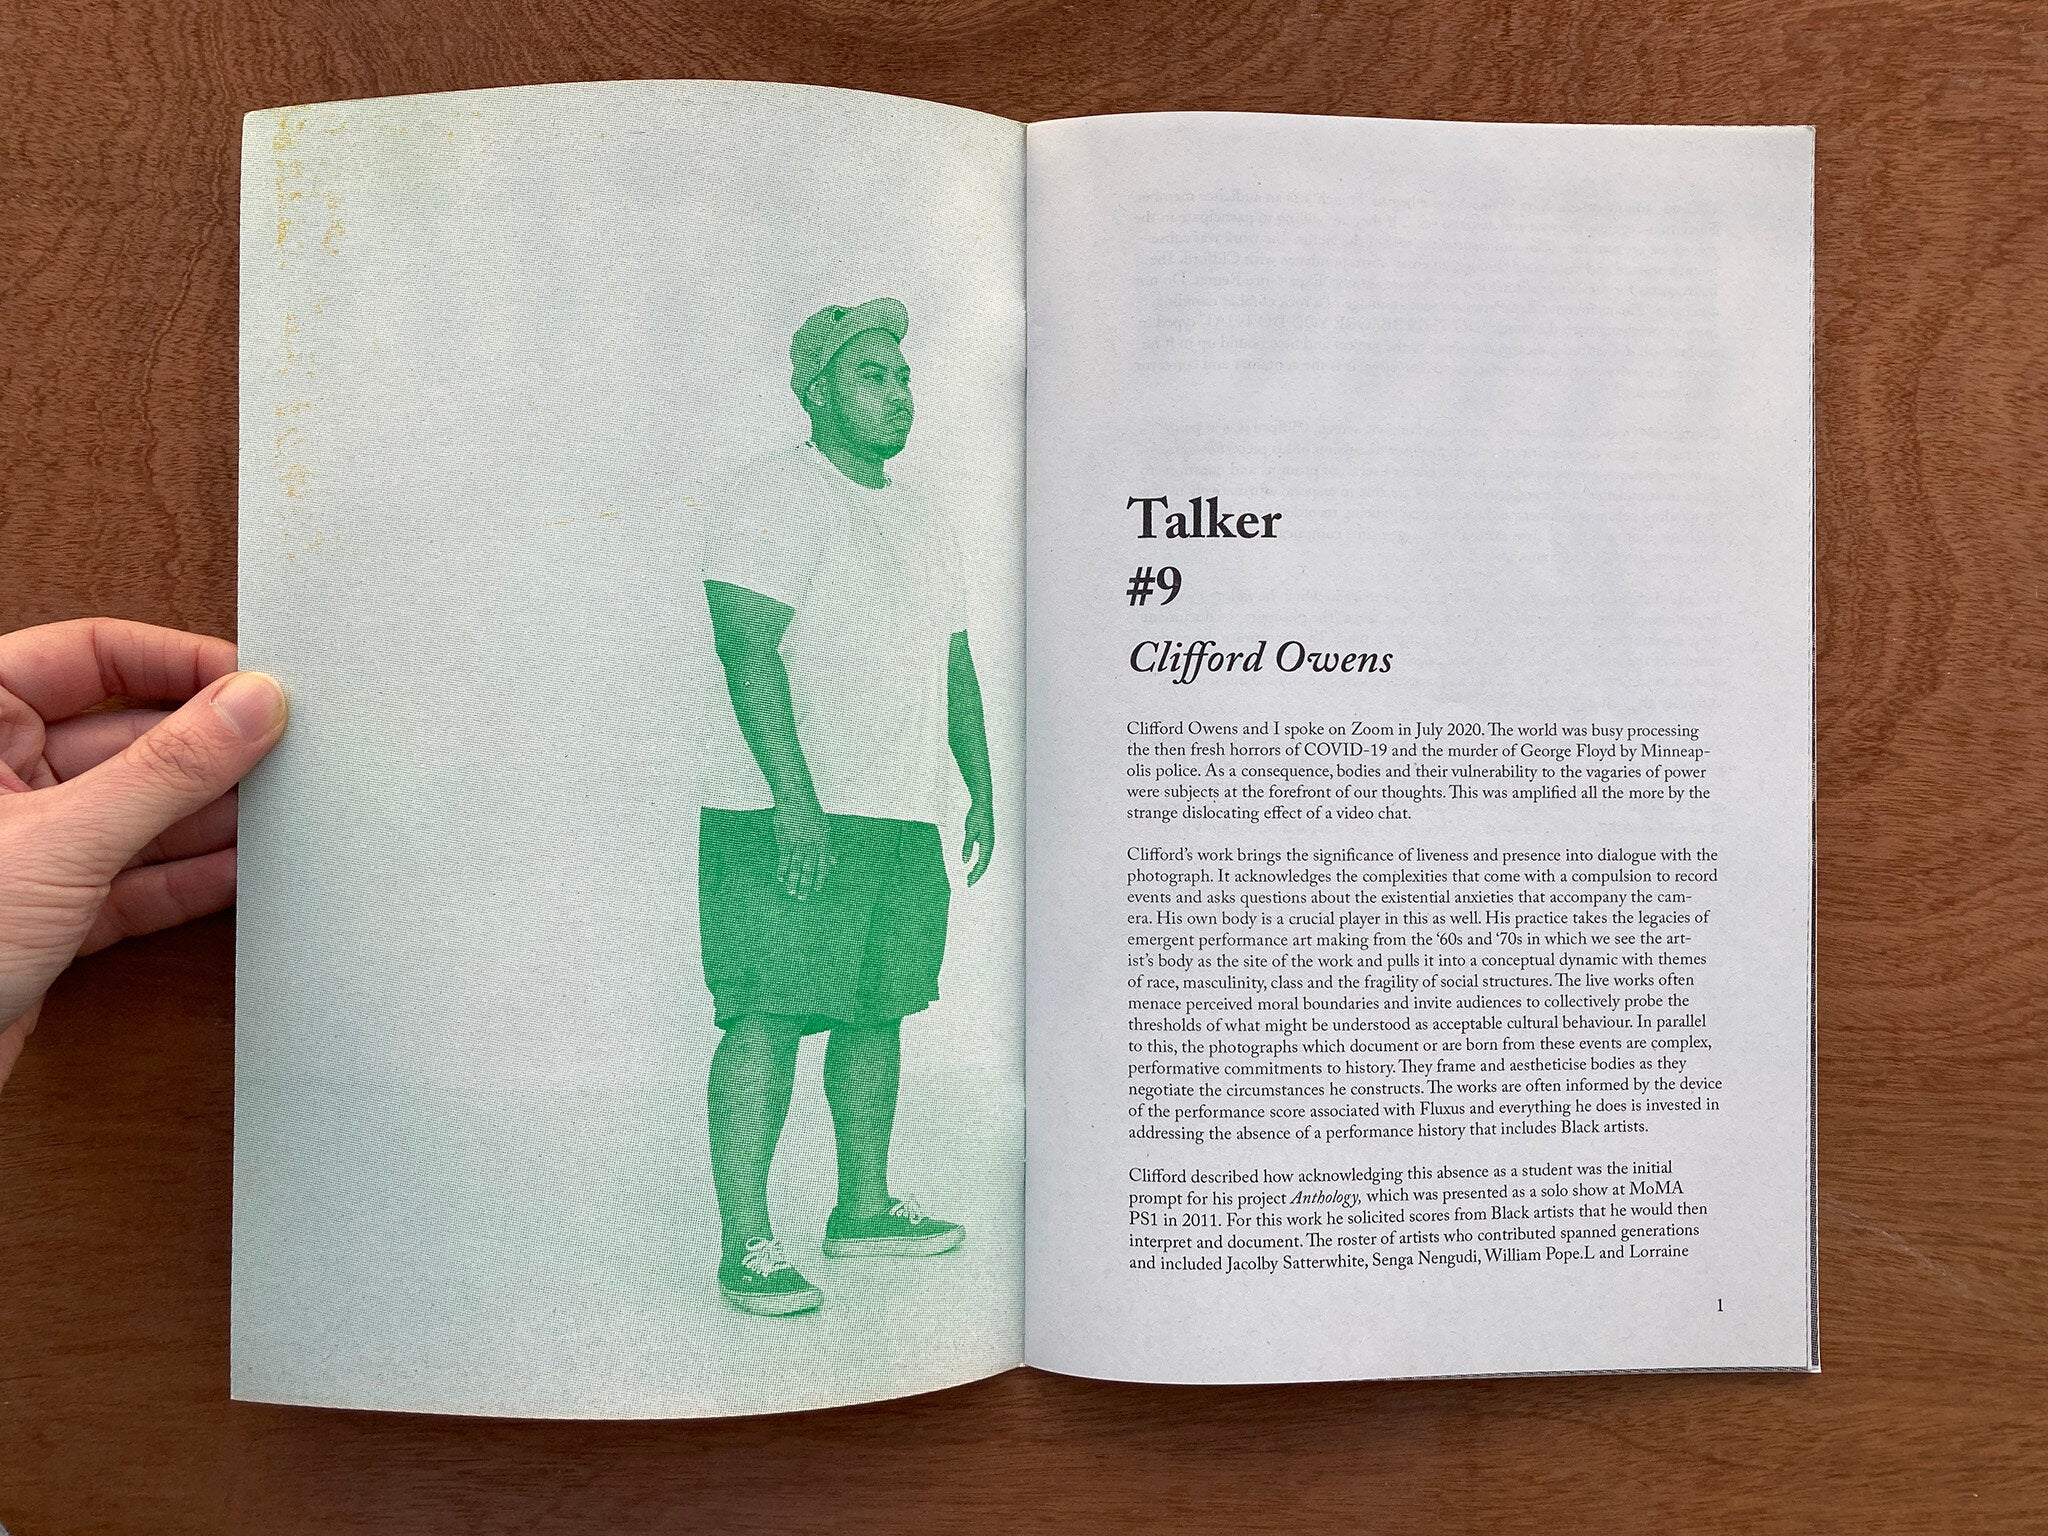 TALKER #9: CLIFFORD OWENS by Giles Bailey